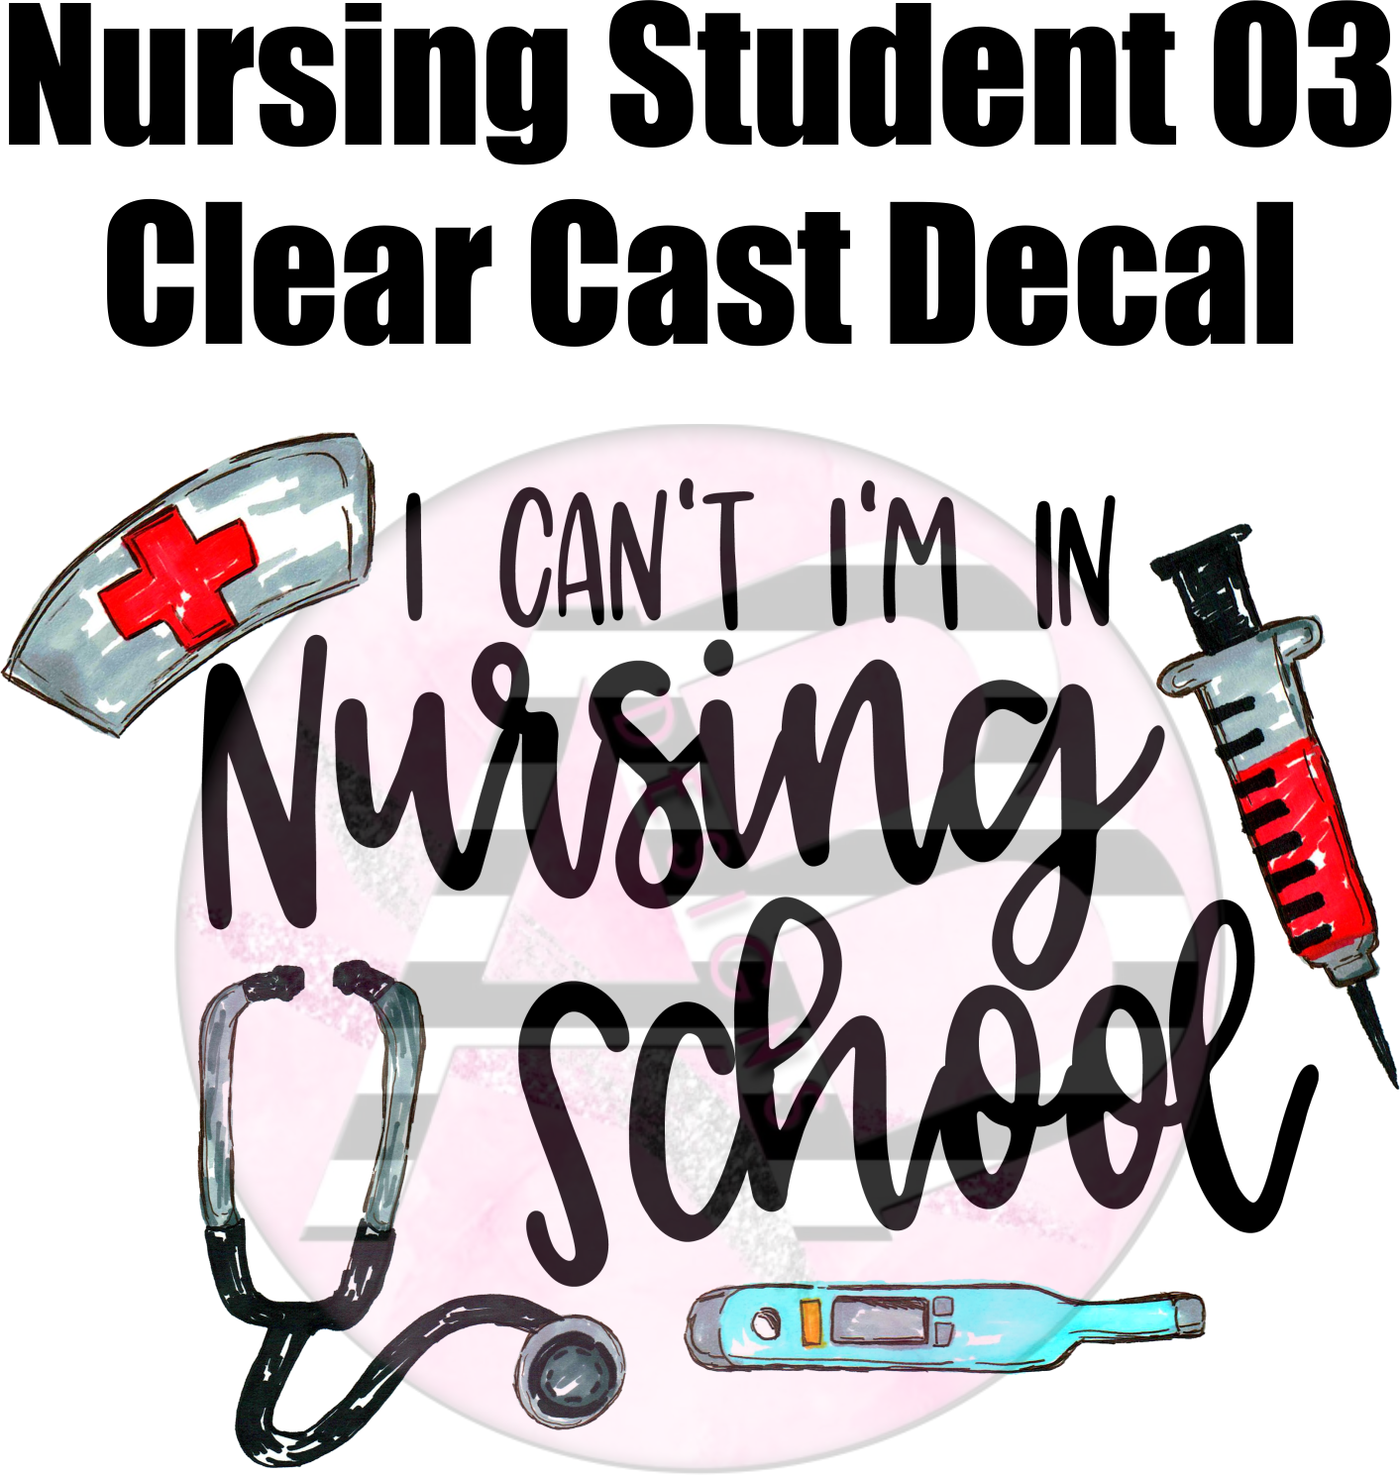 Nursing Student 03 - Clear Cast Decal